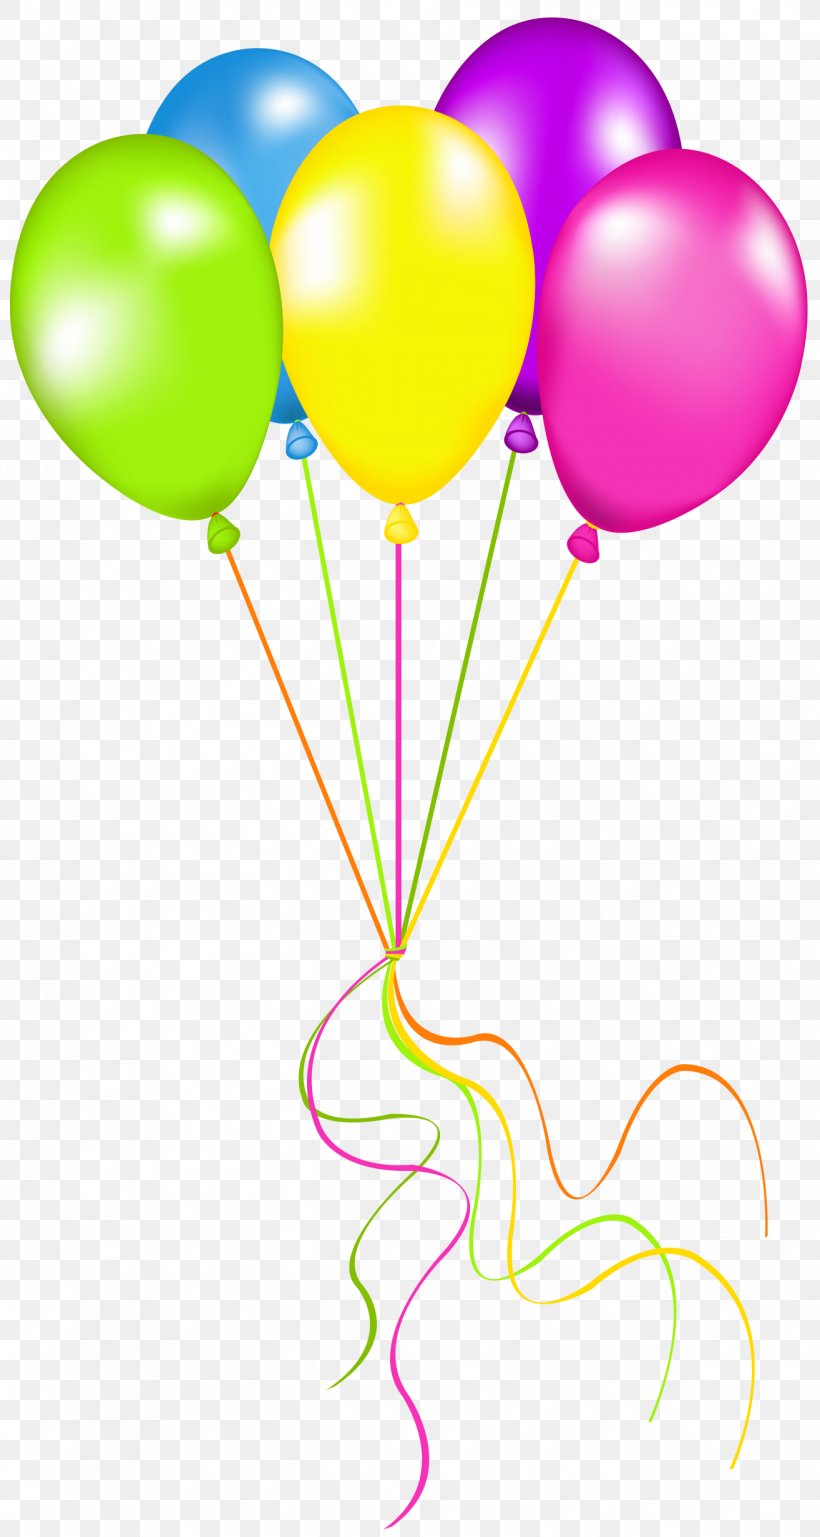 Neon Balloon Party Clip Art, PNG, 1314x2464px, Neon, Balloon, Birthday, Heart, Party Download Free